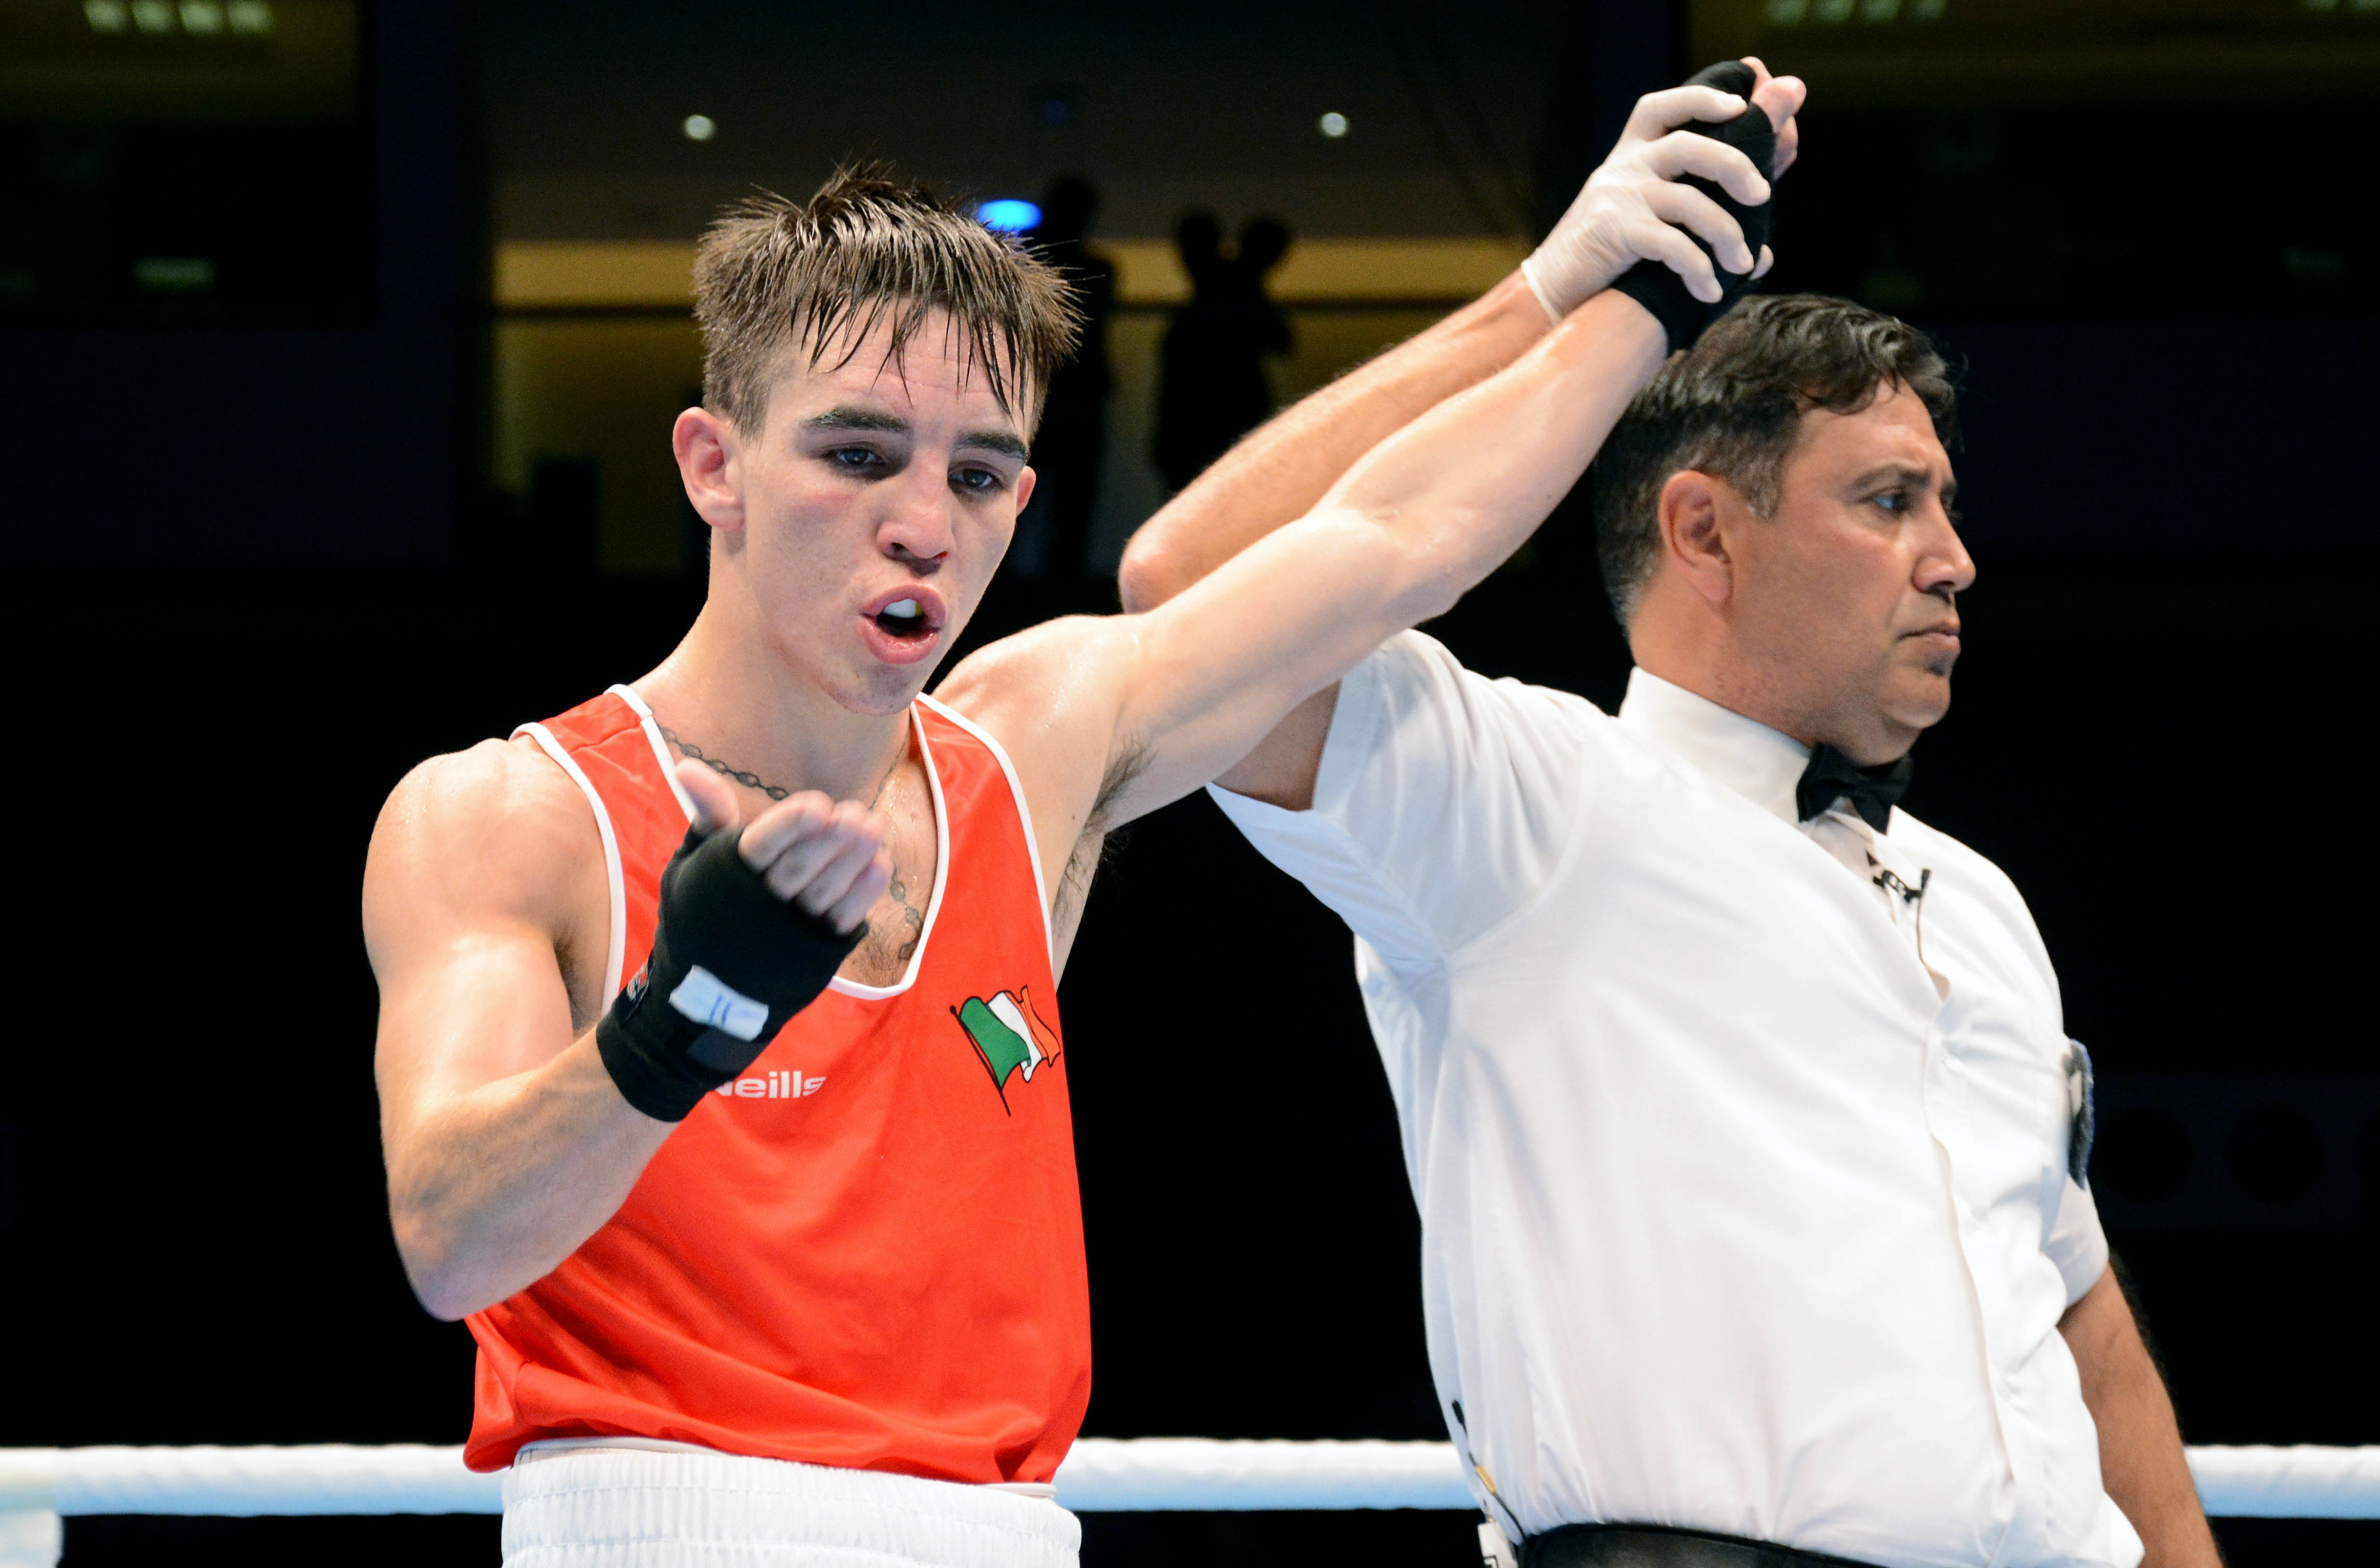 Michael Conlan’s hand is raised after he claimed a unanimous points decision against Belarus boxer Dximitry Asanau